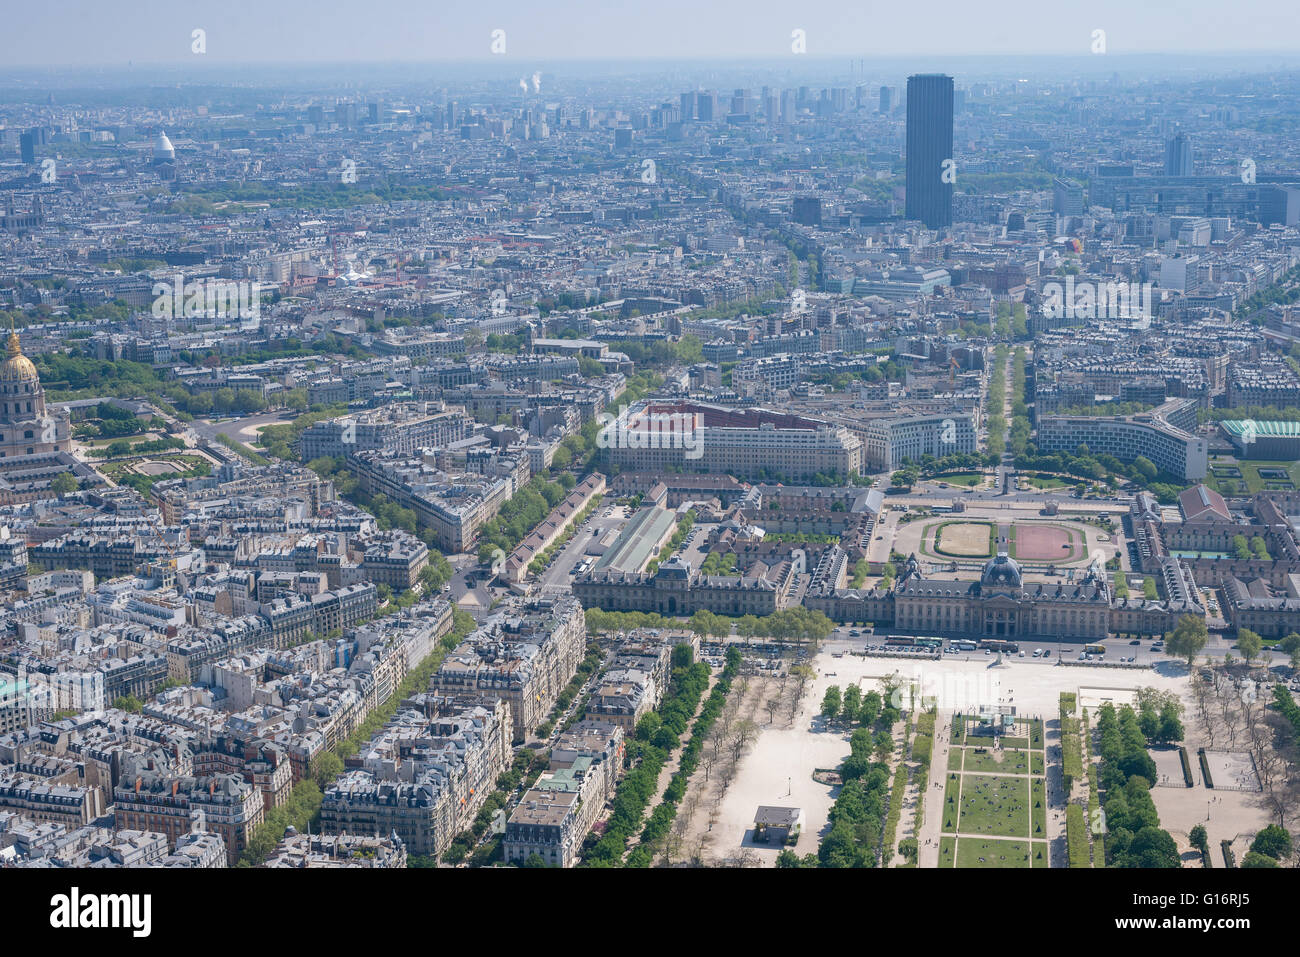 Aerial view of Parc du Champs de Mars and the city of Paris, taken from the top of the Eiffel Tower, looking southeast Stock Photo